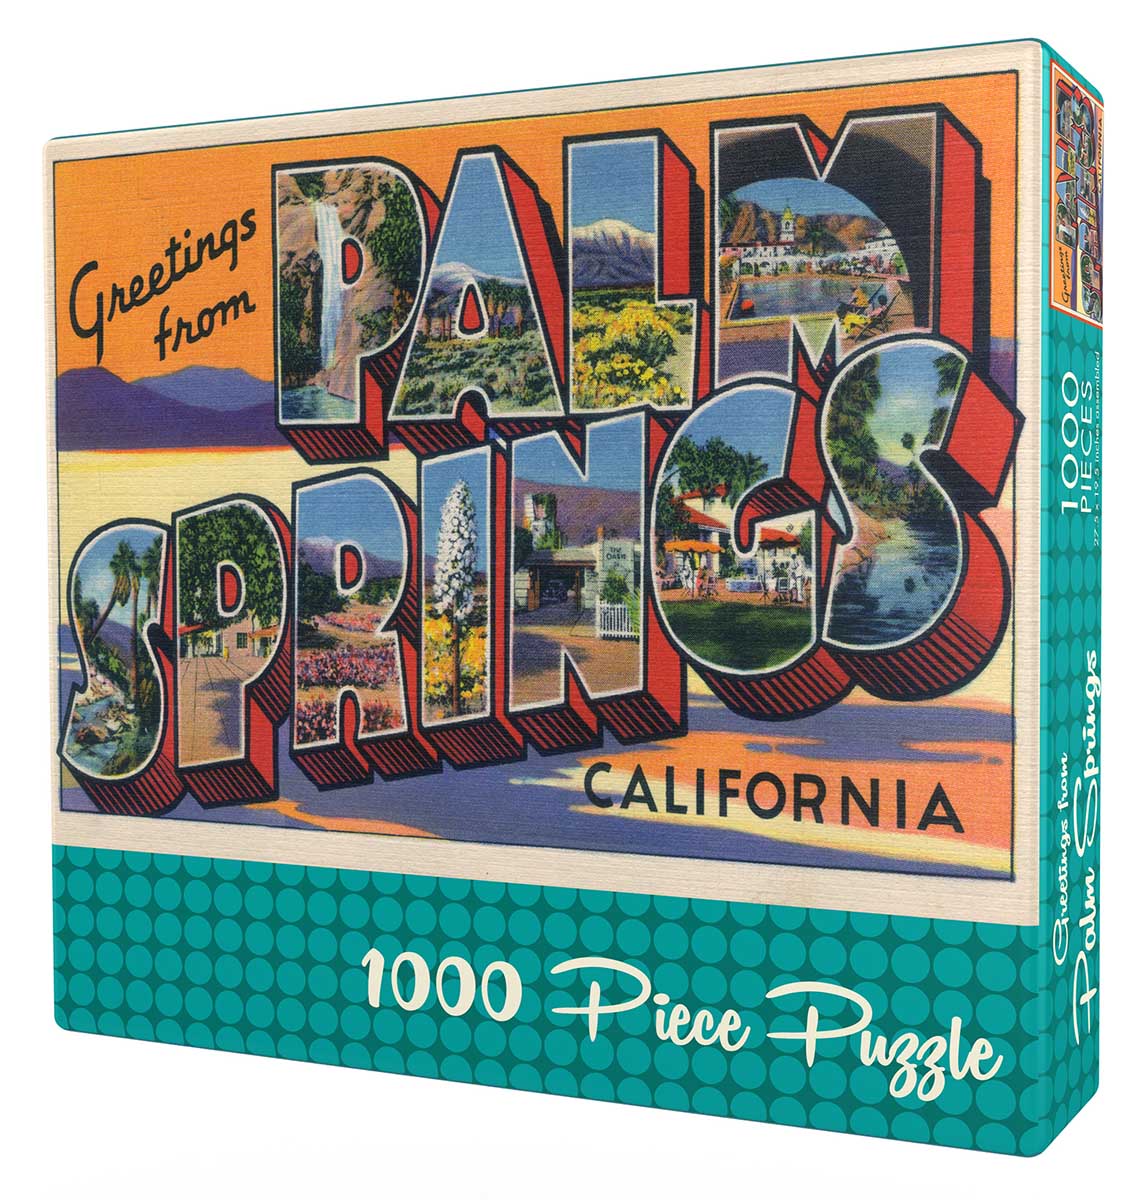 Greetings from Palm Springs Travel Jigsaw Puzzle